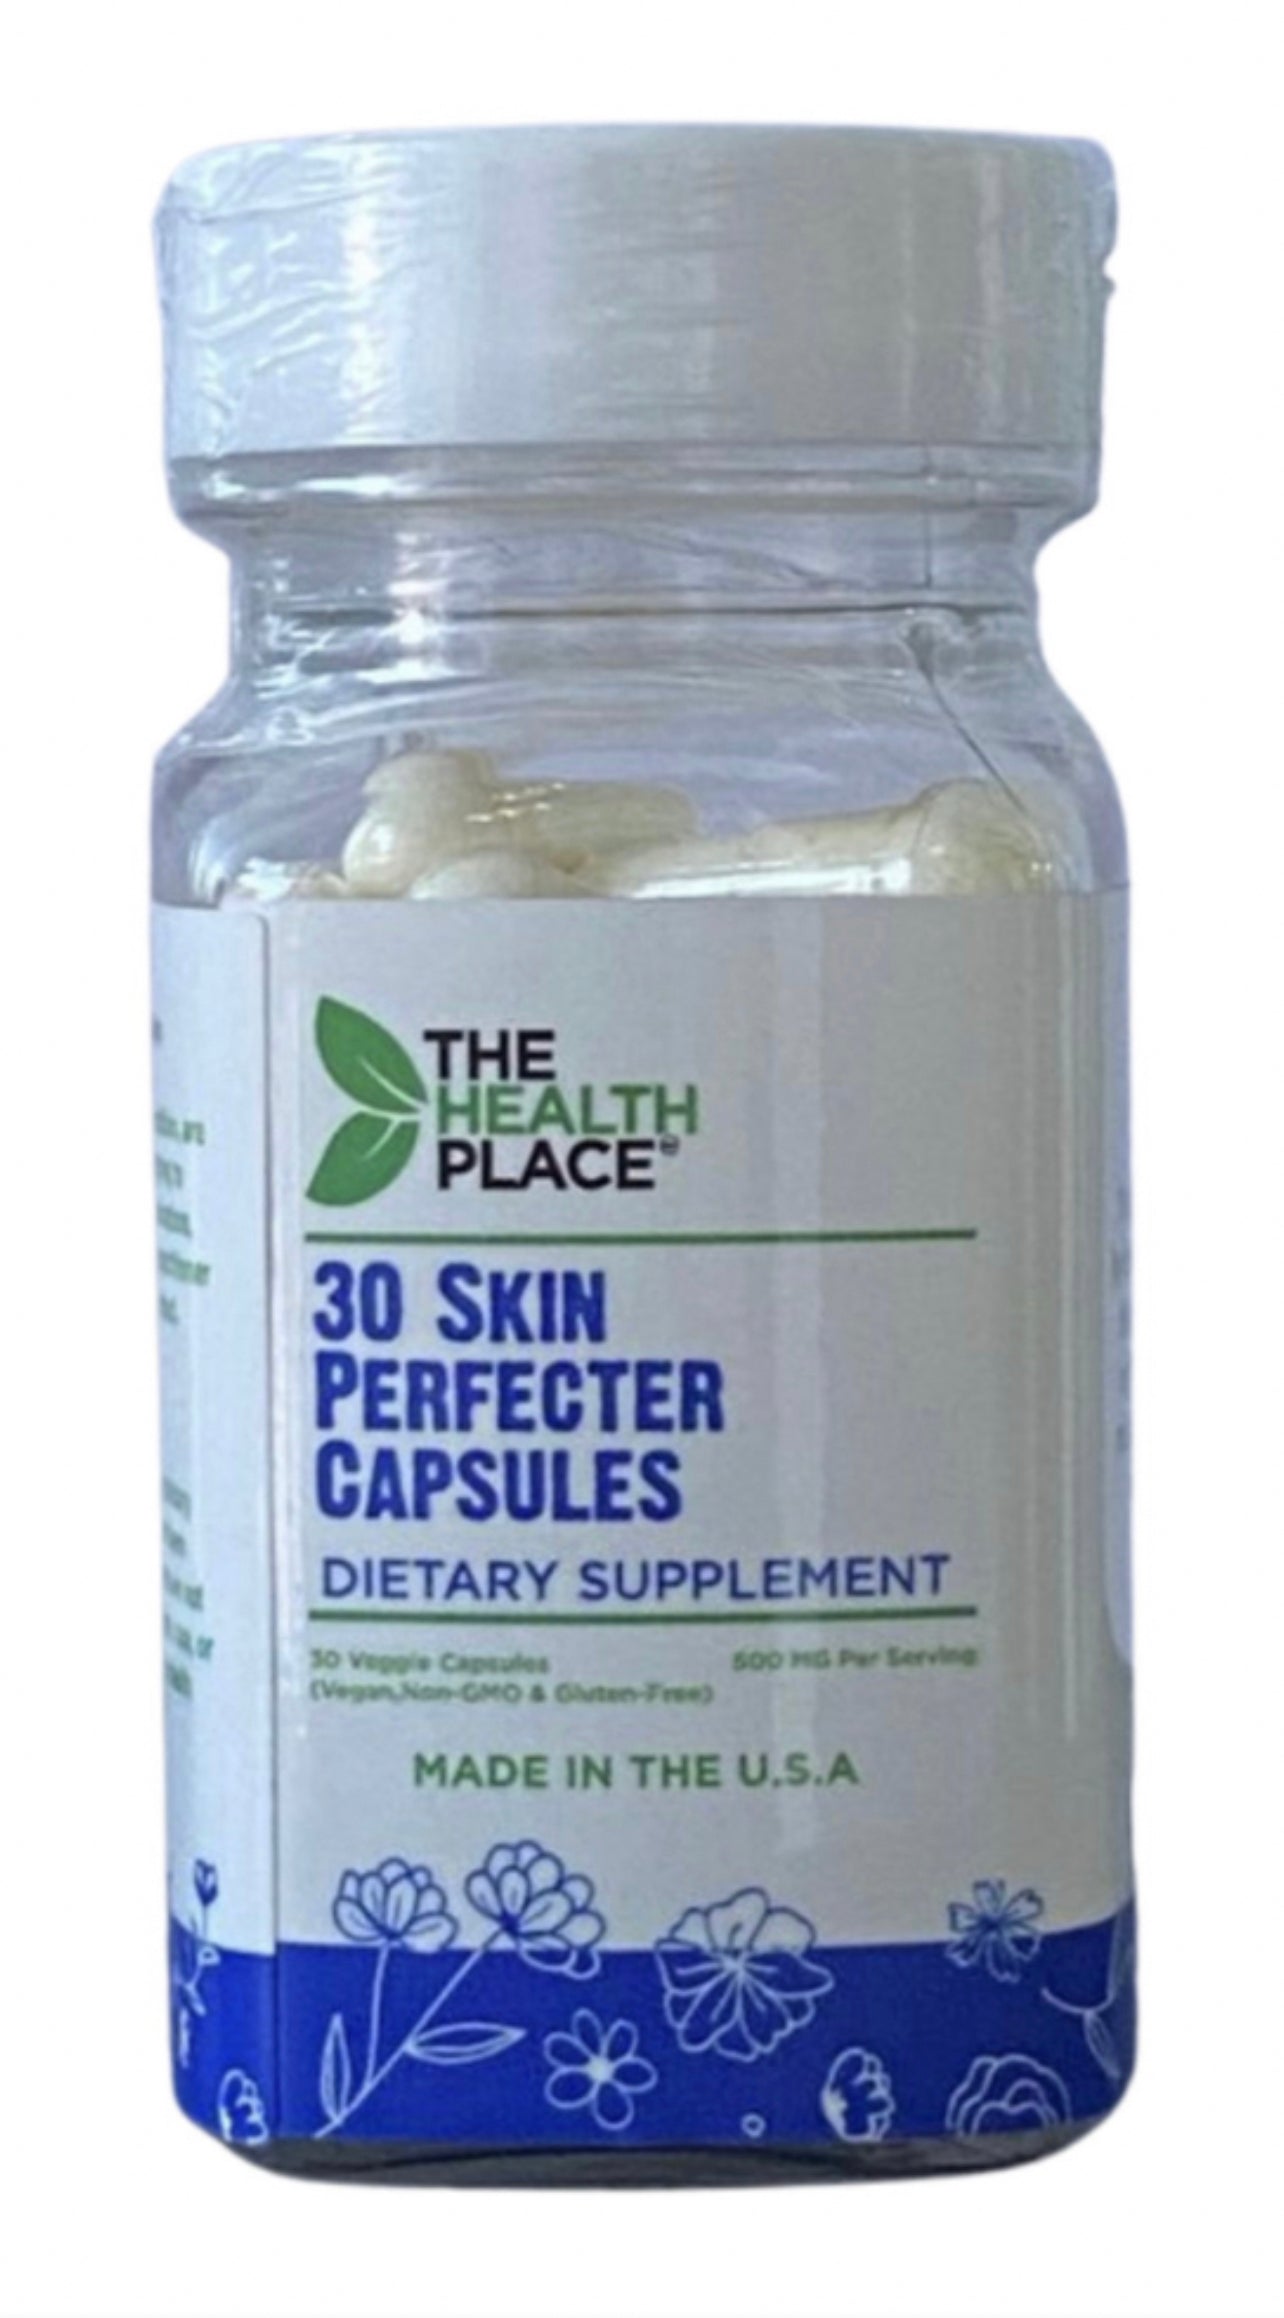 Skin Perfecter - 30 Capsules 650mg each *REFILL PLEASE READ